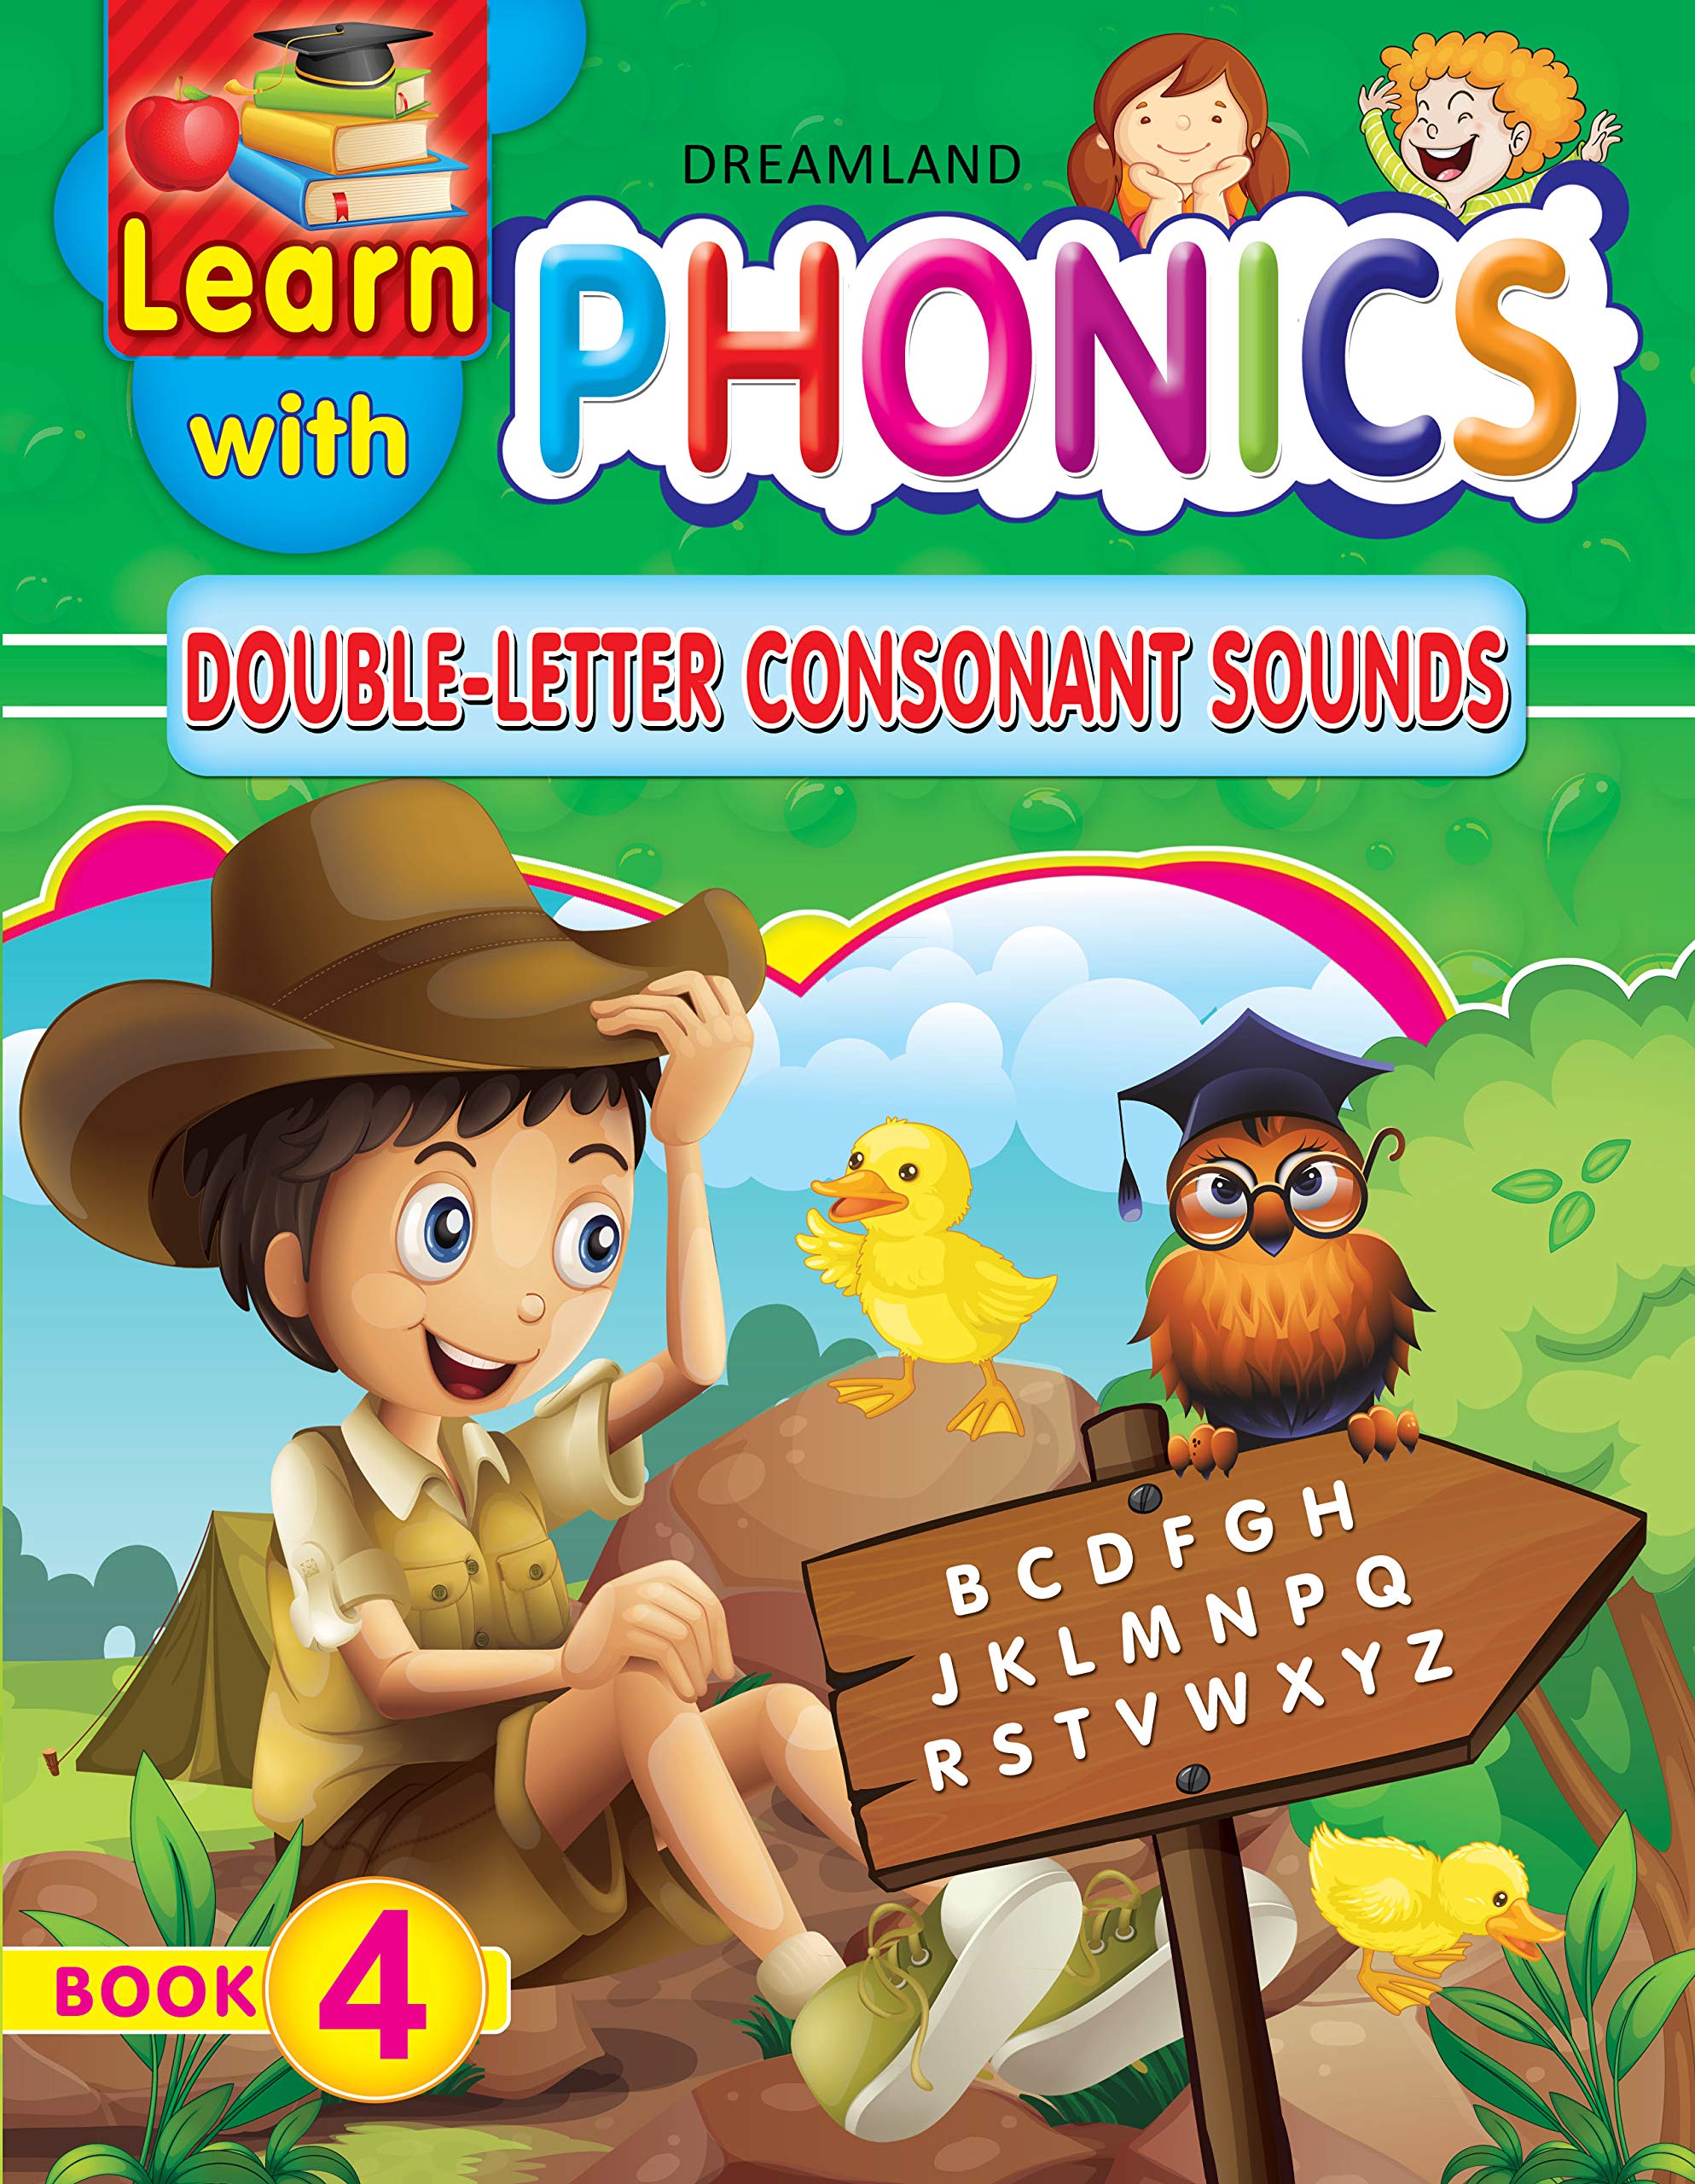 Learn with Phonics (Double-Letter Consonant Sounds)